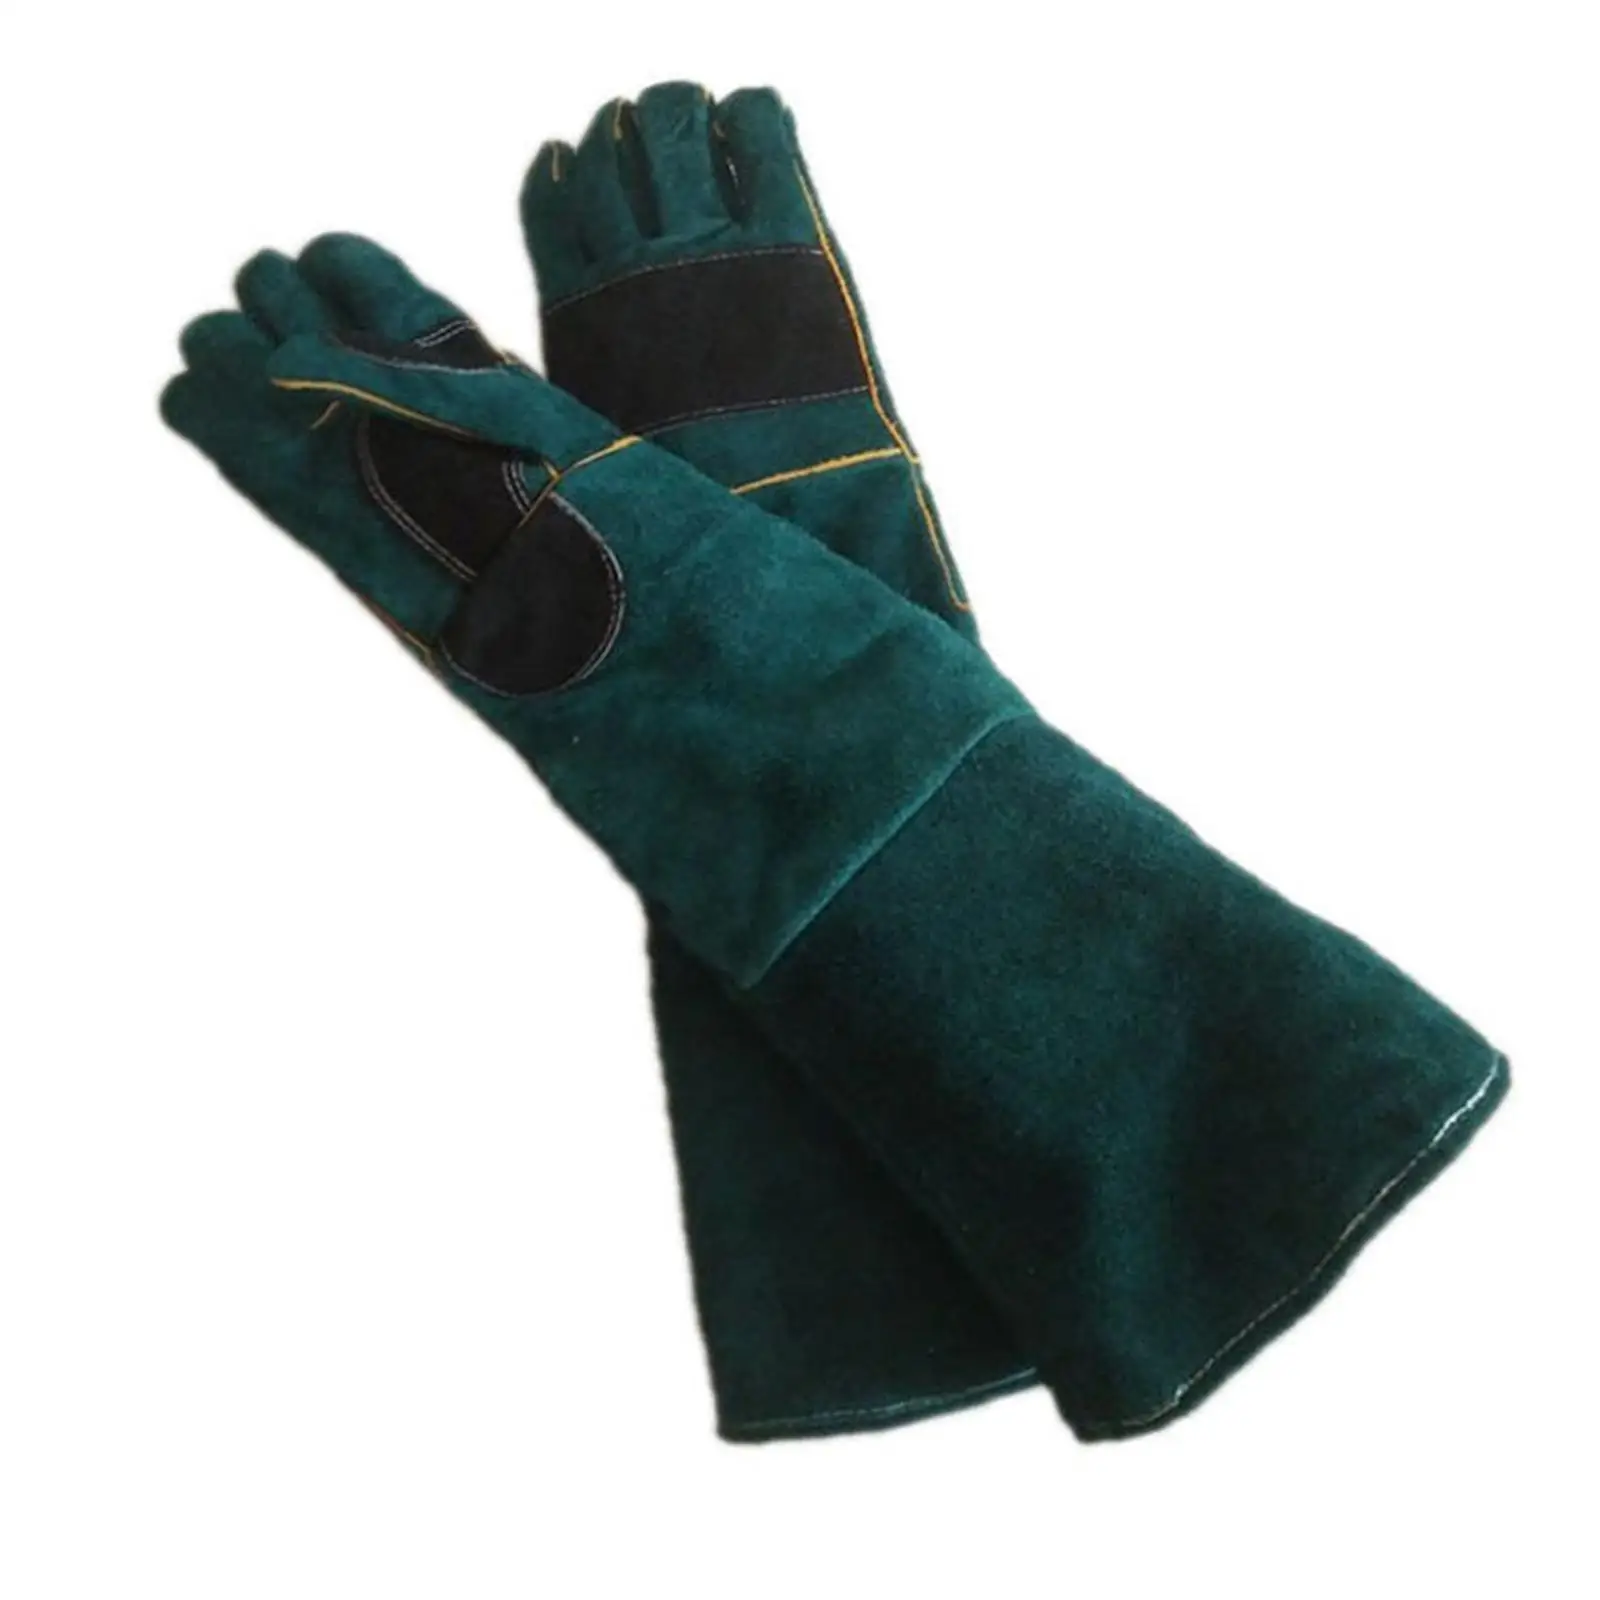 Animal Handling Gloves Bite Resistant Durable Dexterity Anti Bite Protective Gloves for Gardening Training Protection Zoo Staff